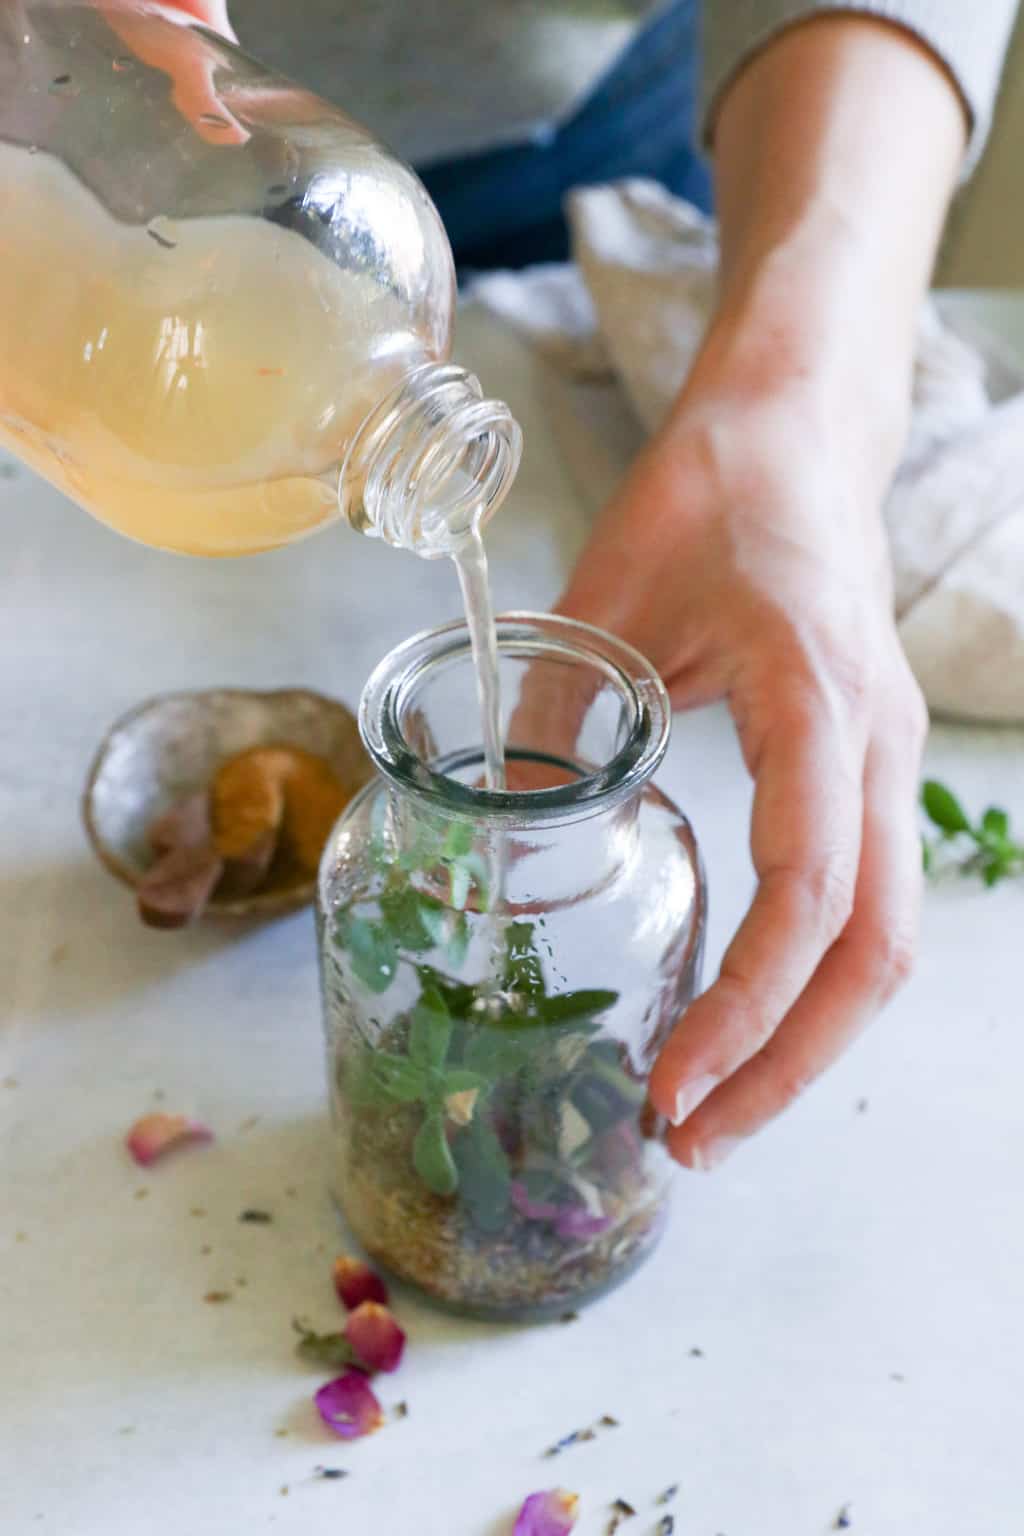 Add vinegar to infuse with herbs